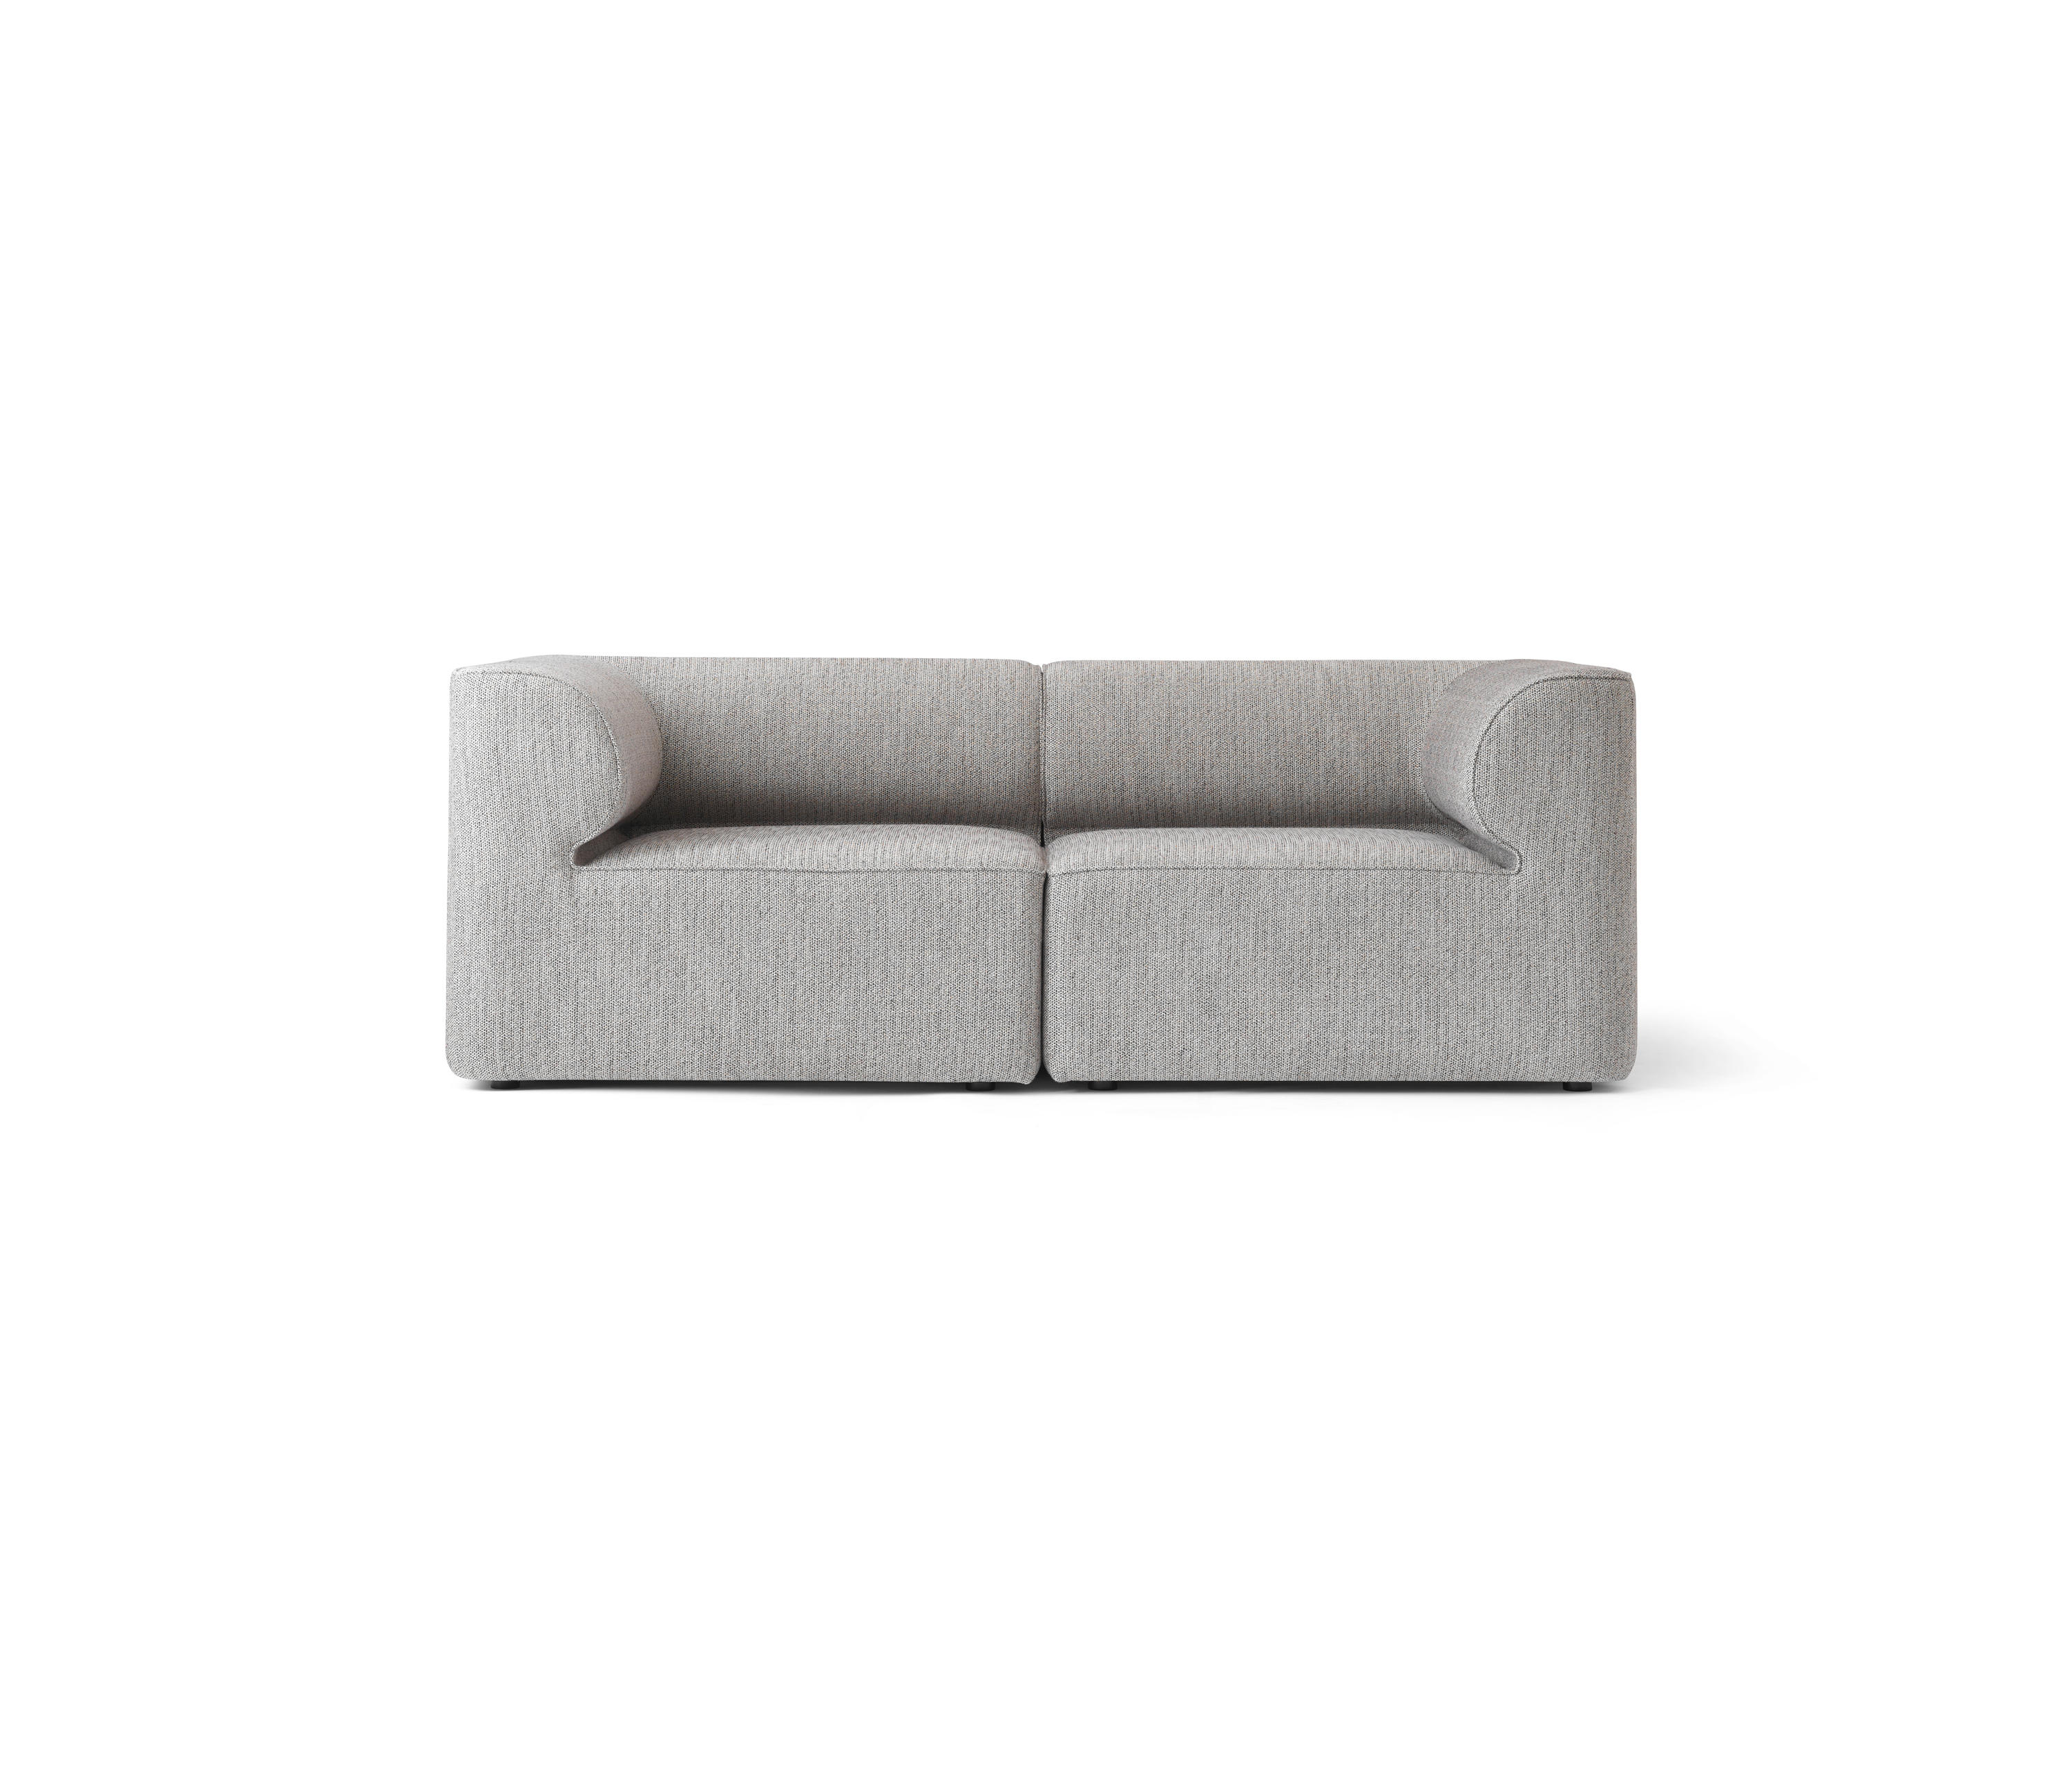 Eave Modular Sofa by Norm.Architects for Menu